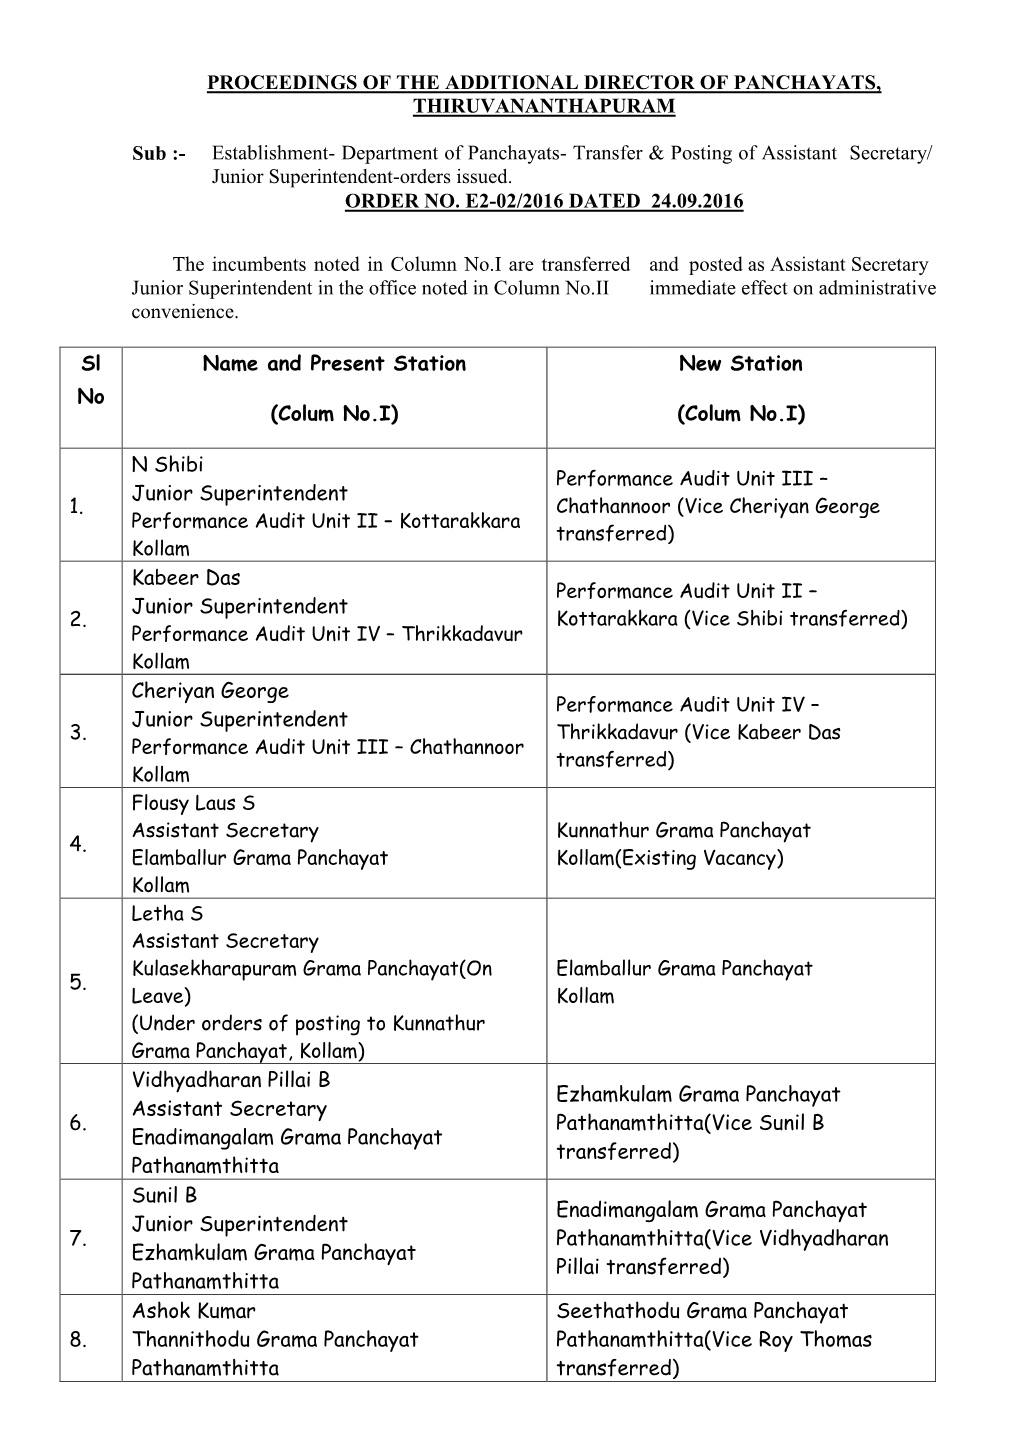 Department of Panchayats- Transfer & Posting of Assistant Secretary/ Junior Superintendent-Orders Issued